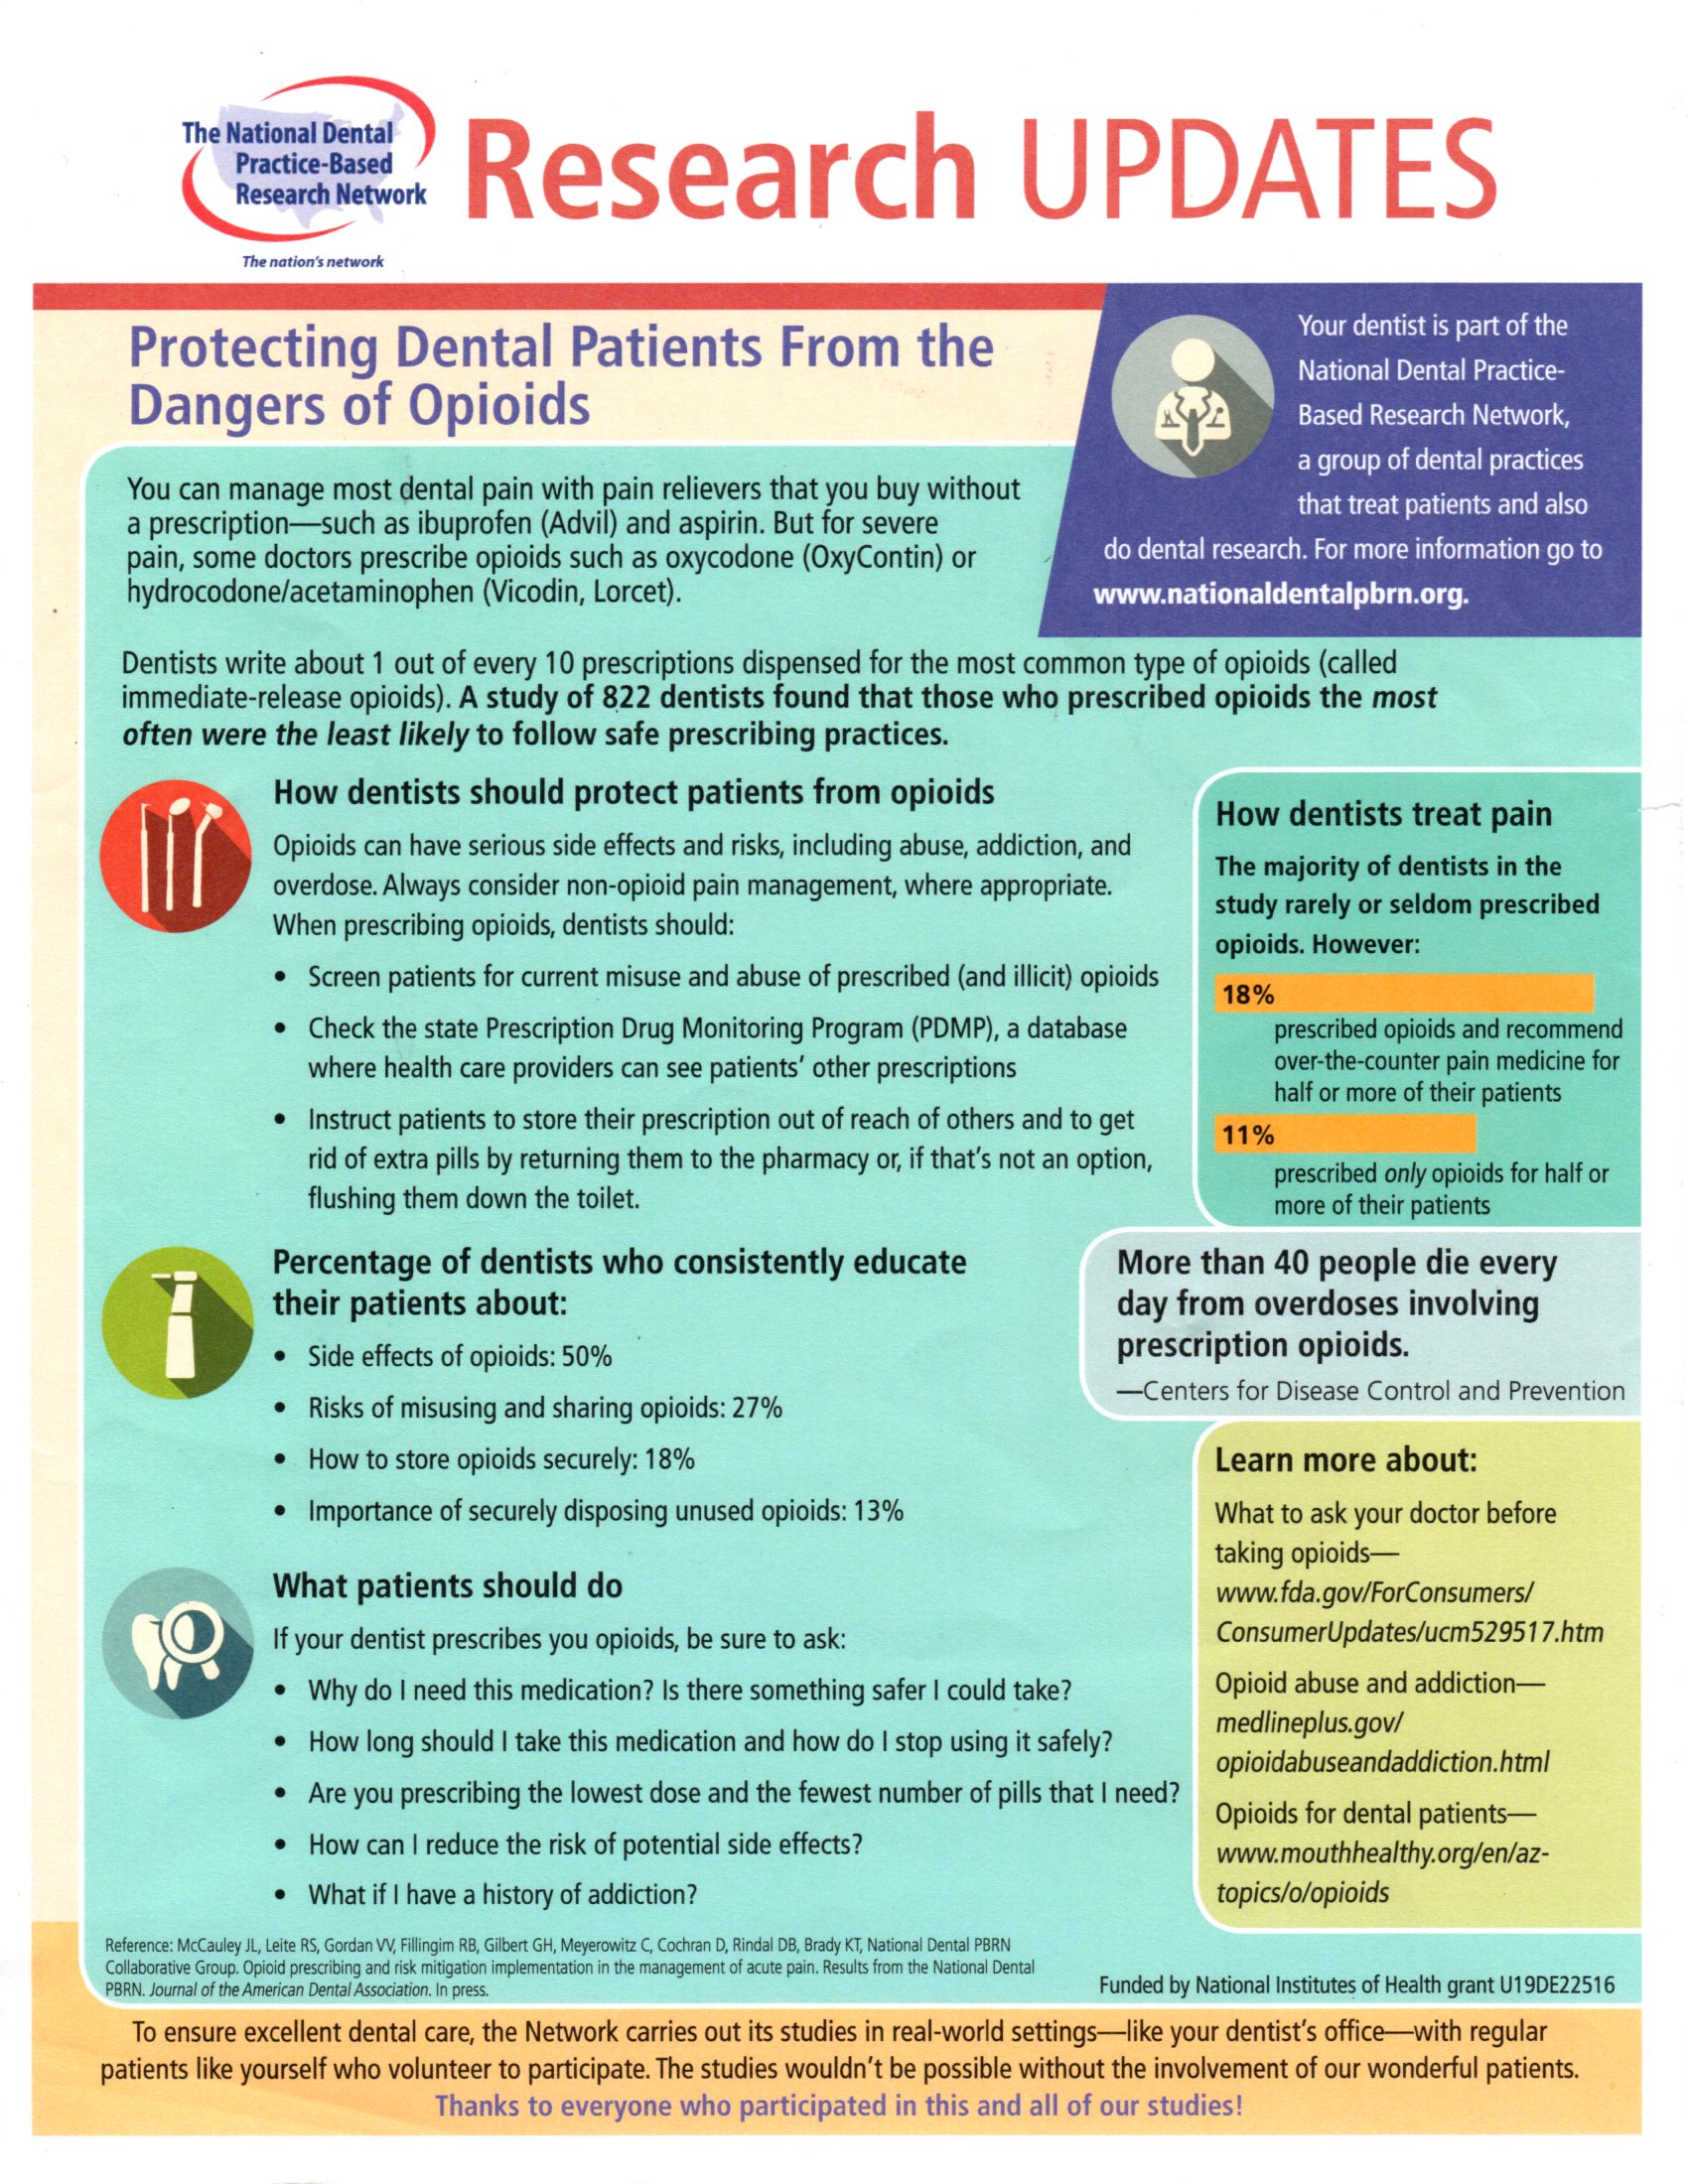 Protecting dental patients from the dangers of opioids